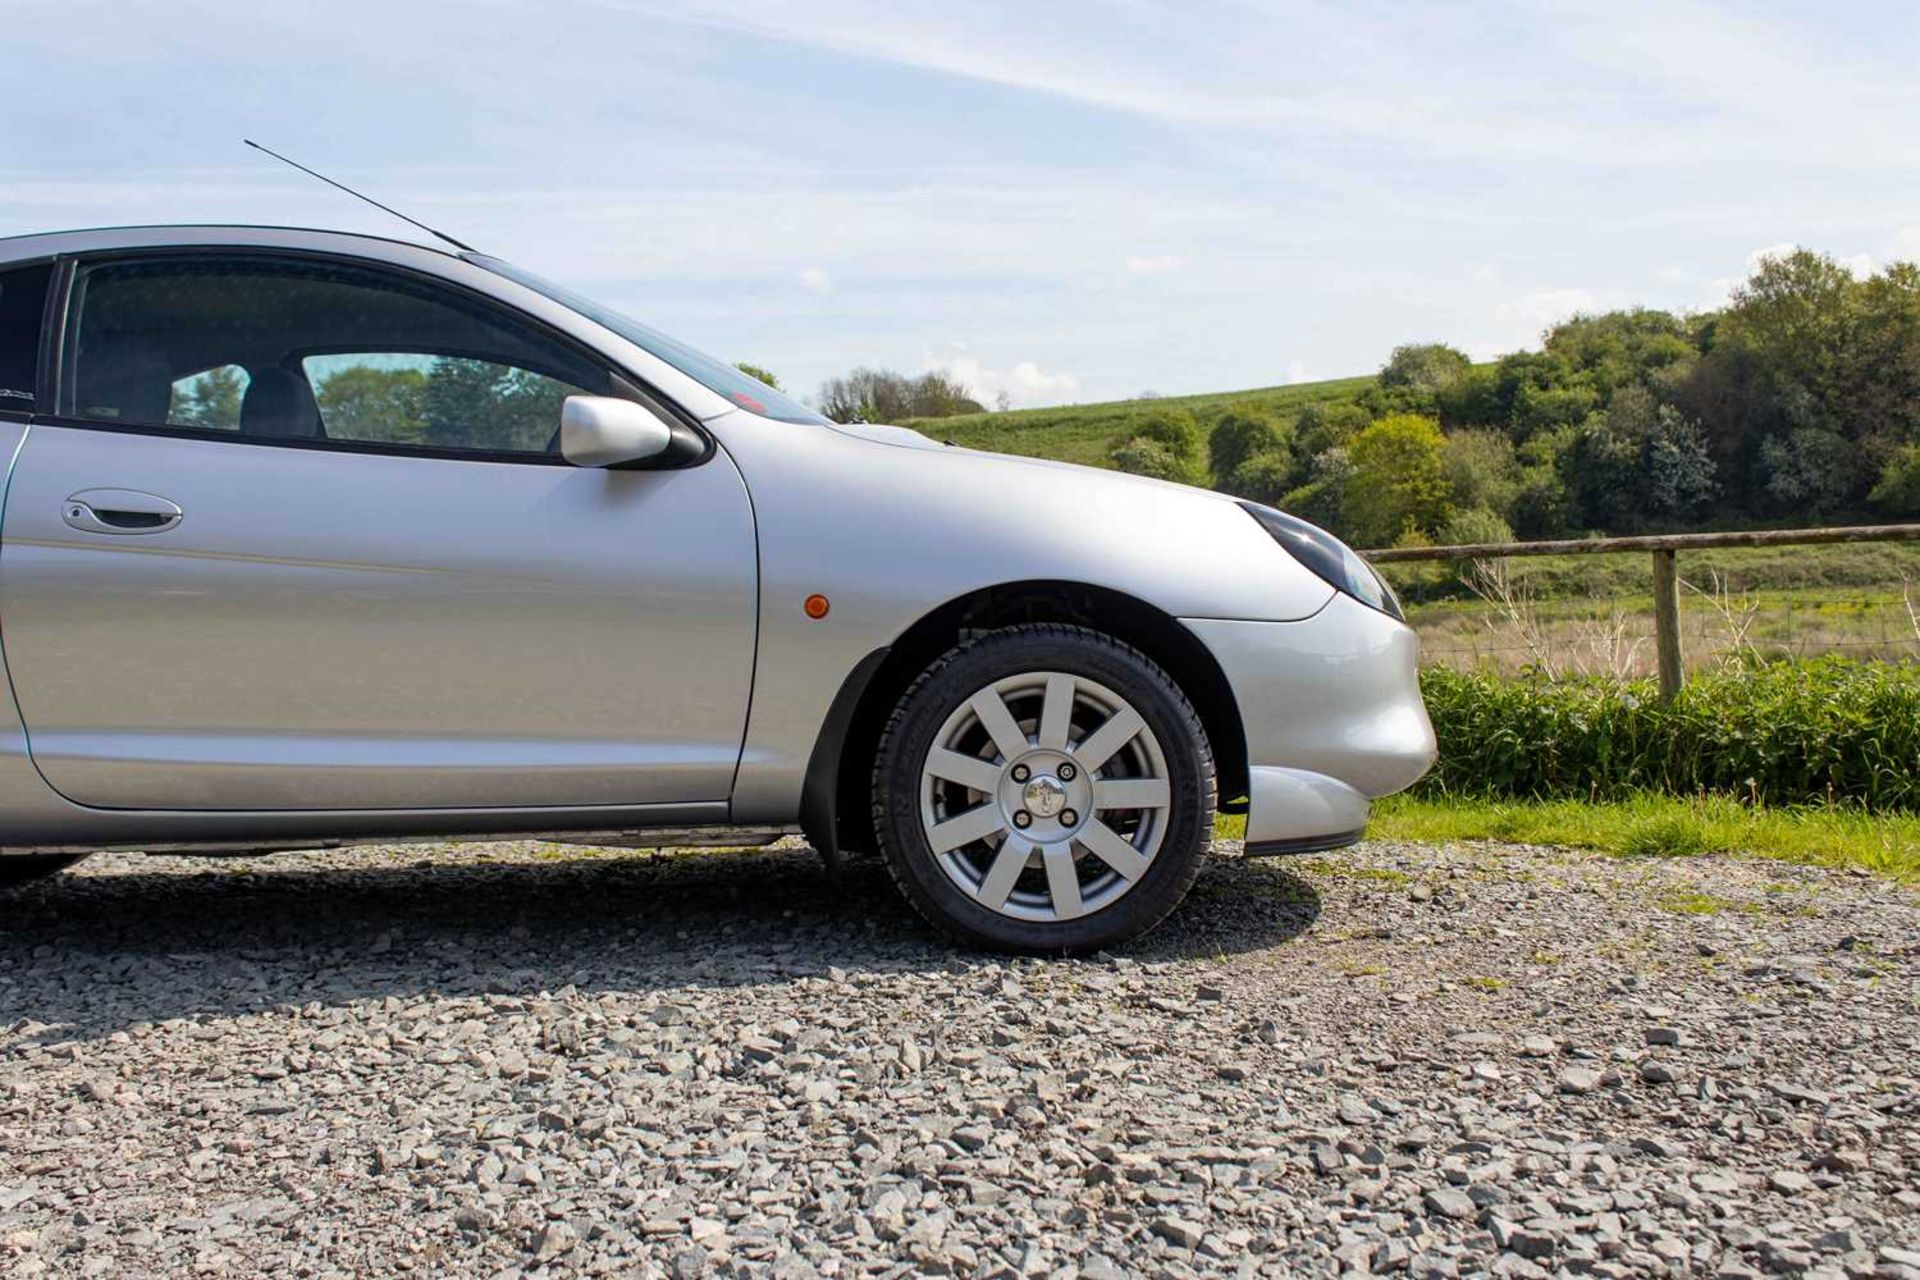 2001 Ford Puma Only 28,000 miles from new  - Image 27 of 99